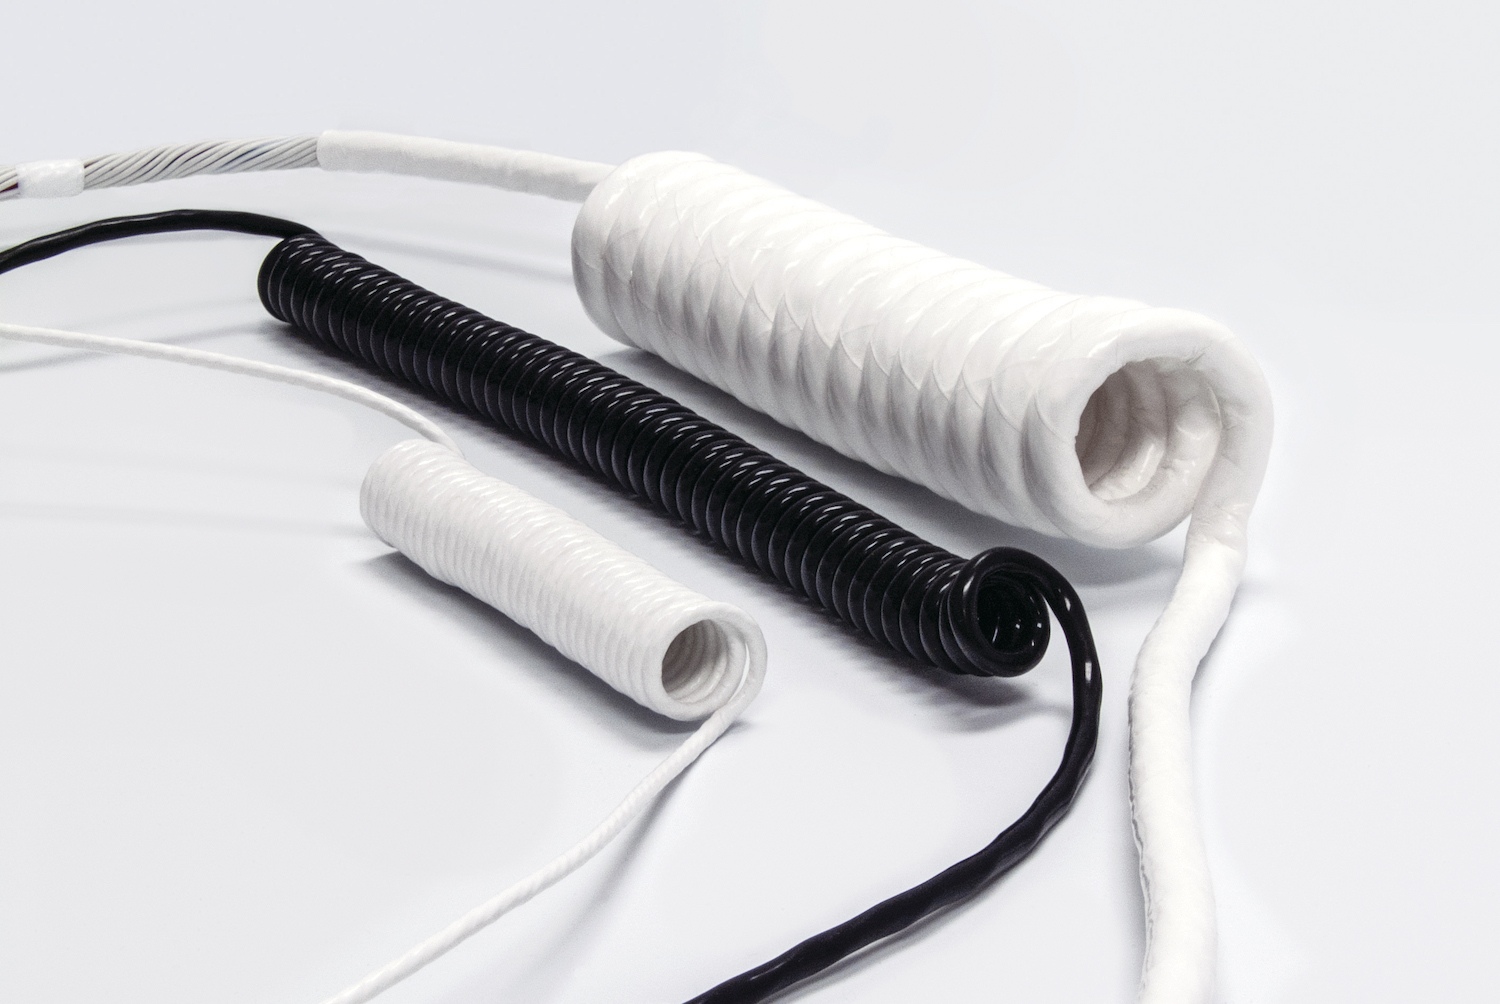 CarlisleIT Coil Cord solutions offer cable management via neat, coiled packaging